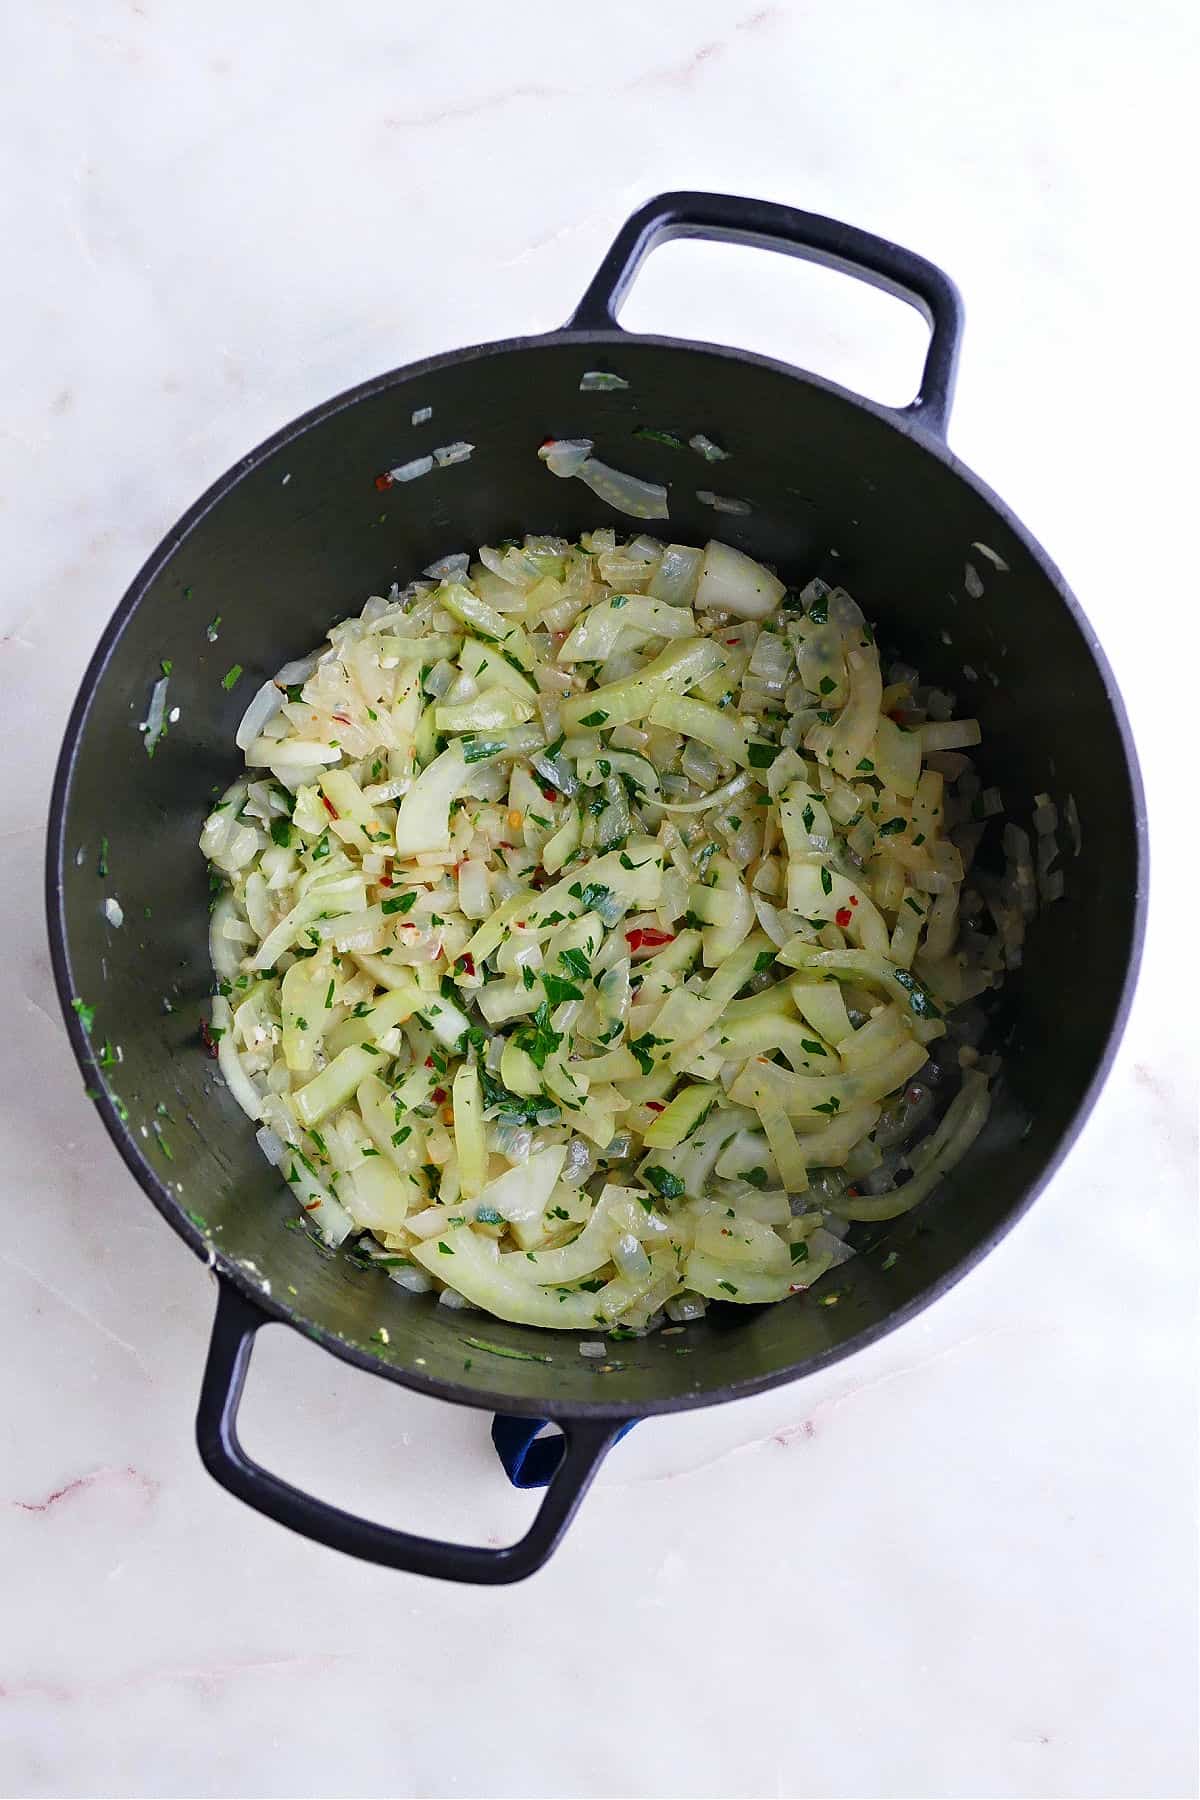 cooked fennel, onion, garlic, and parsley in a black pot on a counter